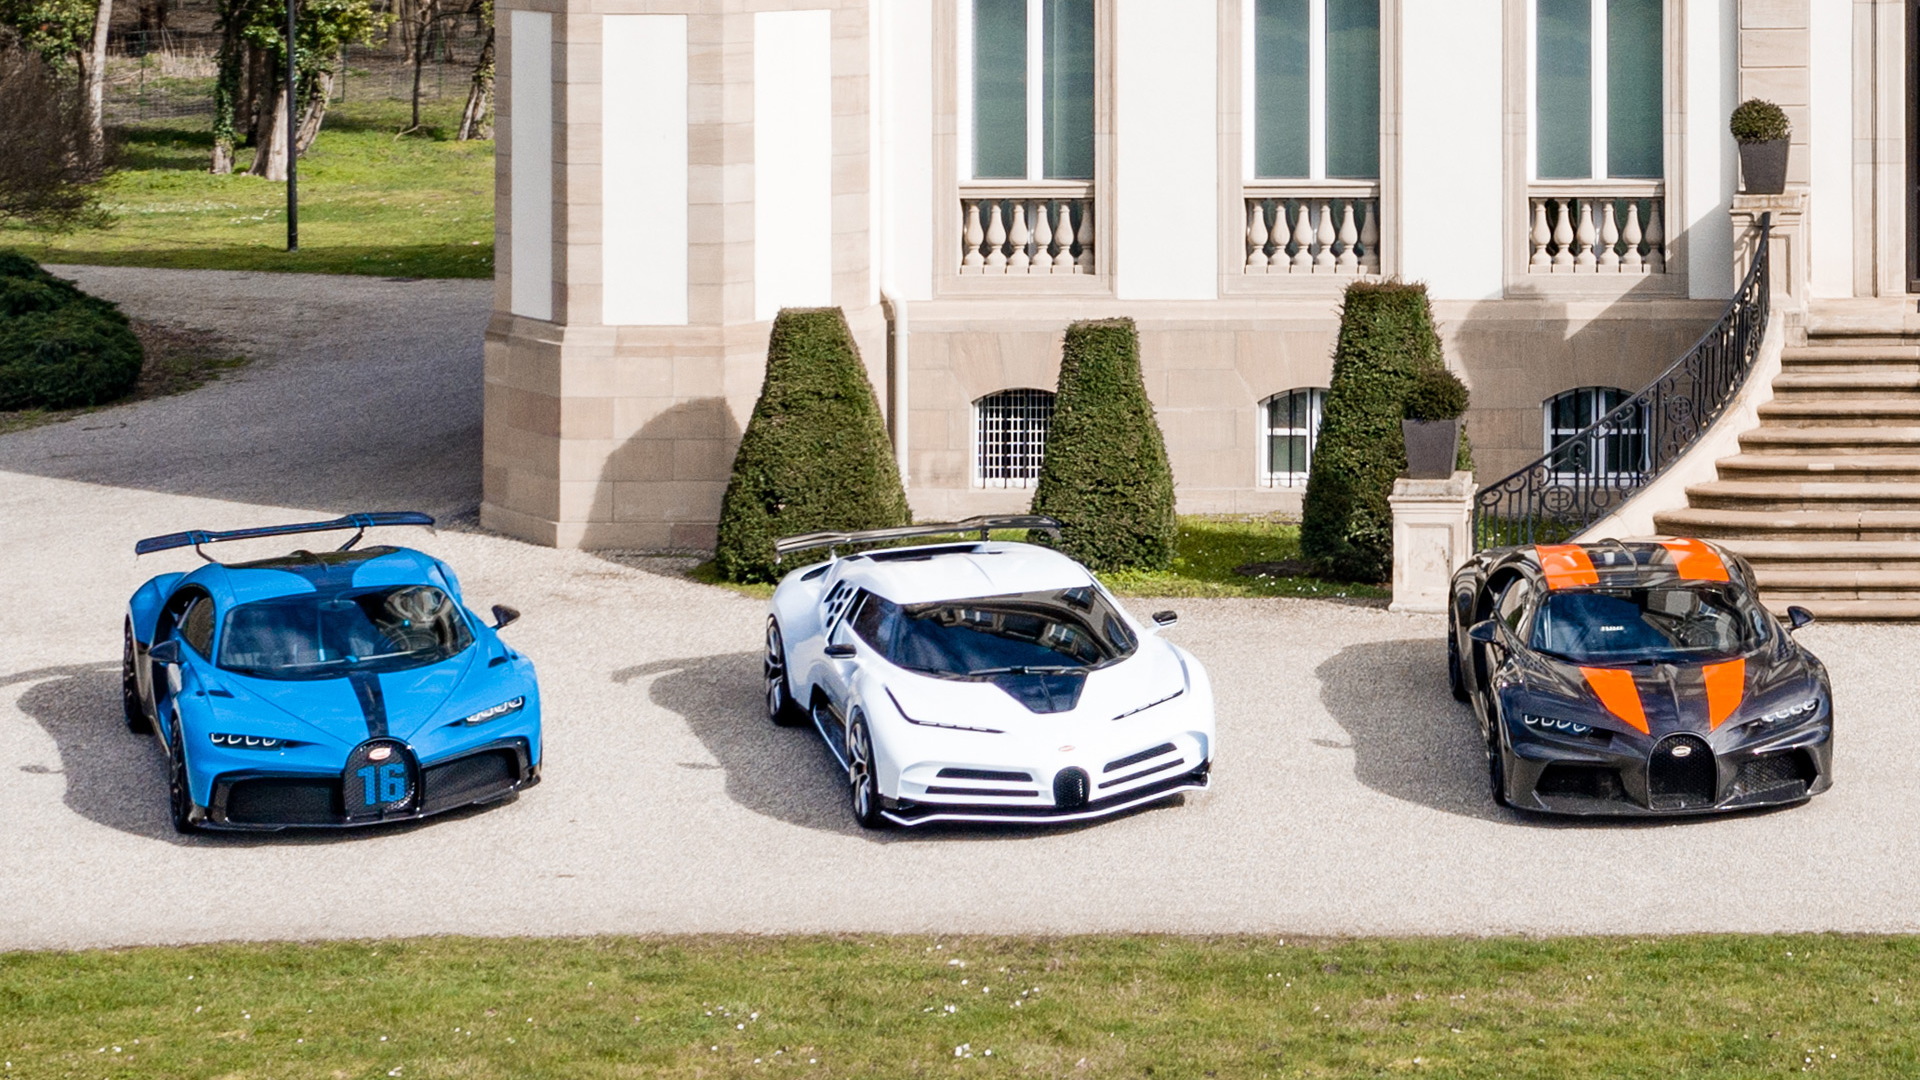 Collection of rare Bugattis at automaker's headquarters in Molsheim, France